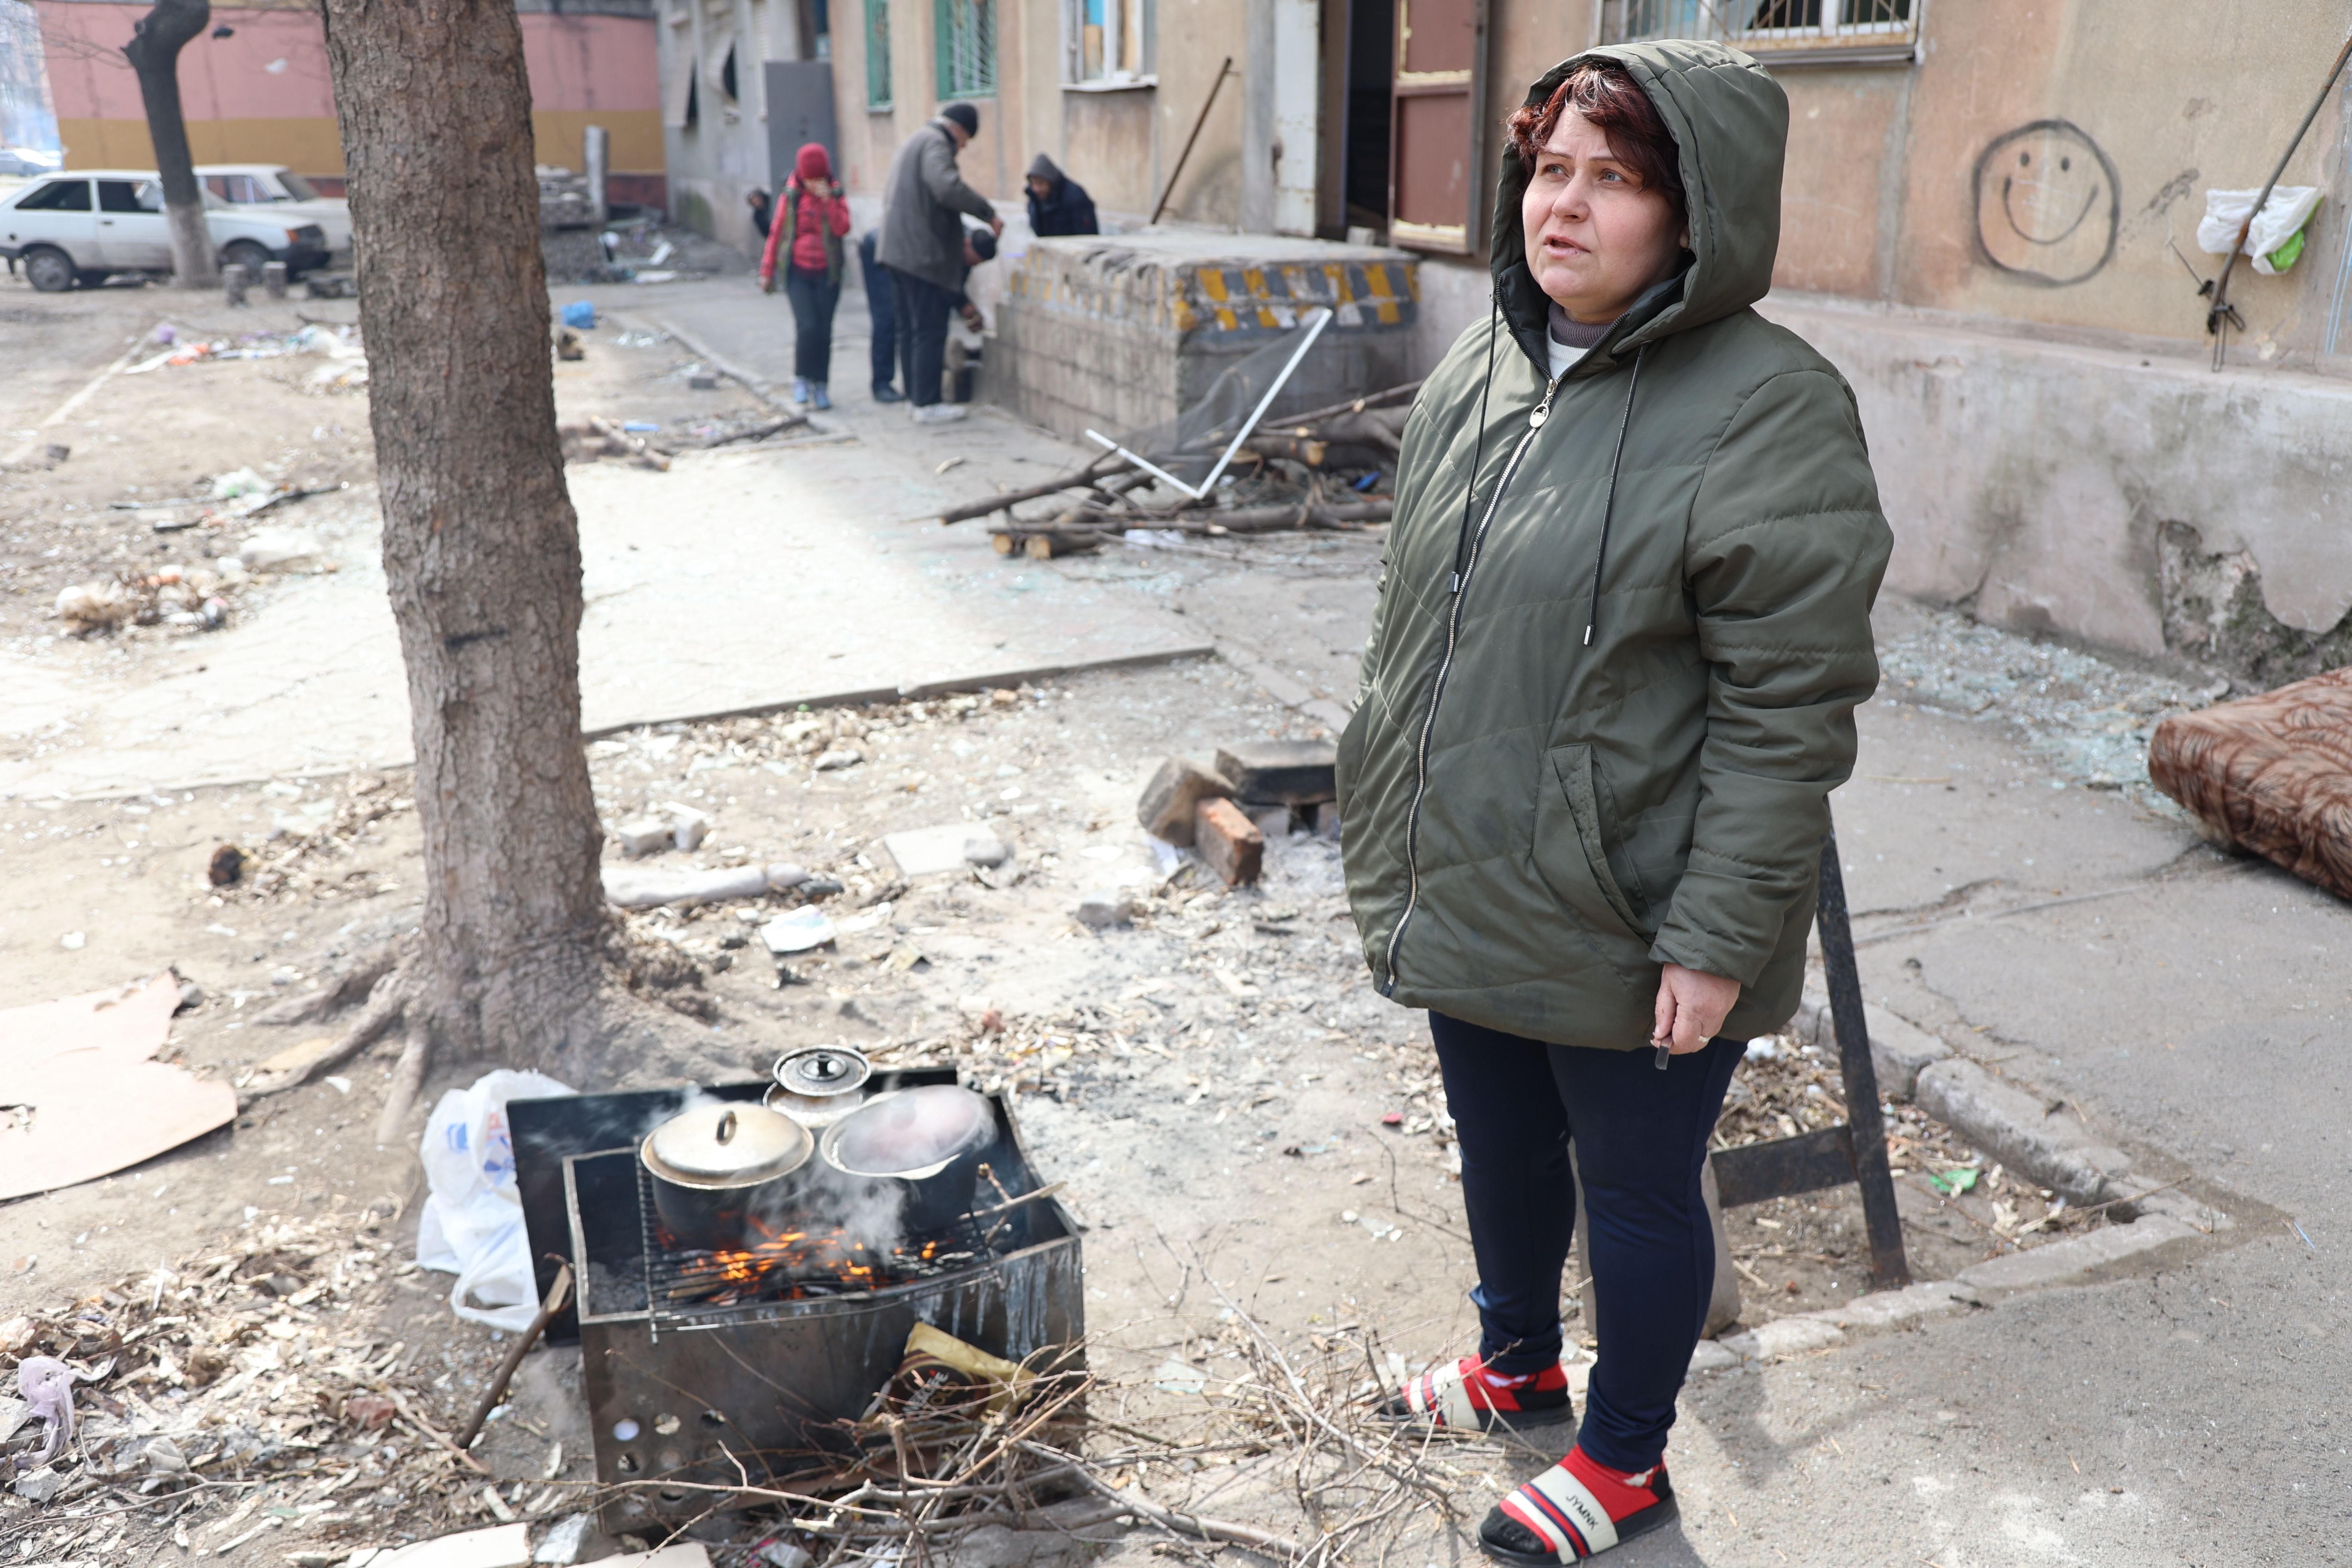 Civilians cook food amid the rubble of an apartment building damaged by the March 29 Russian military and pro-Russian separatist Ukrainian city of Mariupol shelling.